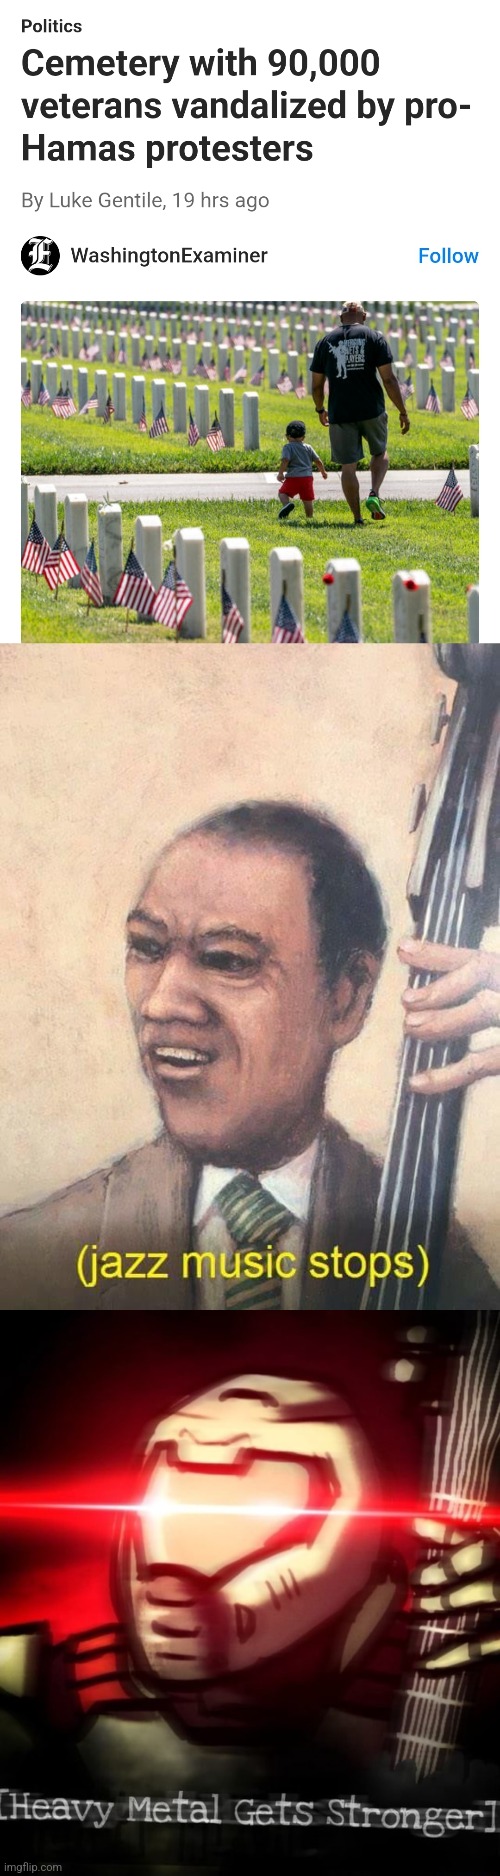 image tagged in jazz music stops | made w/ Imgflip meme maker